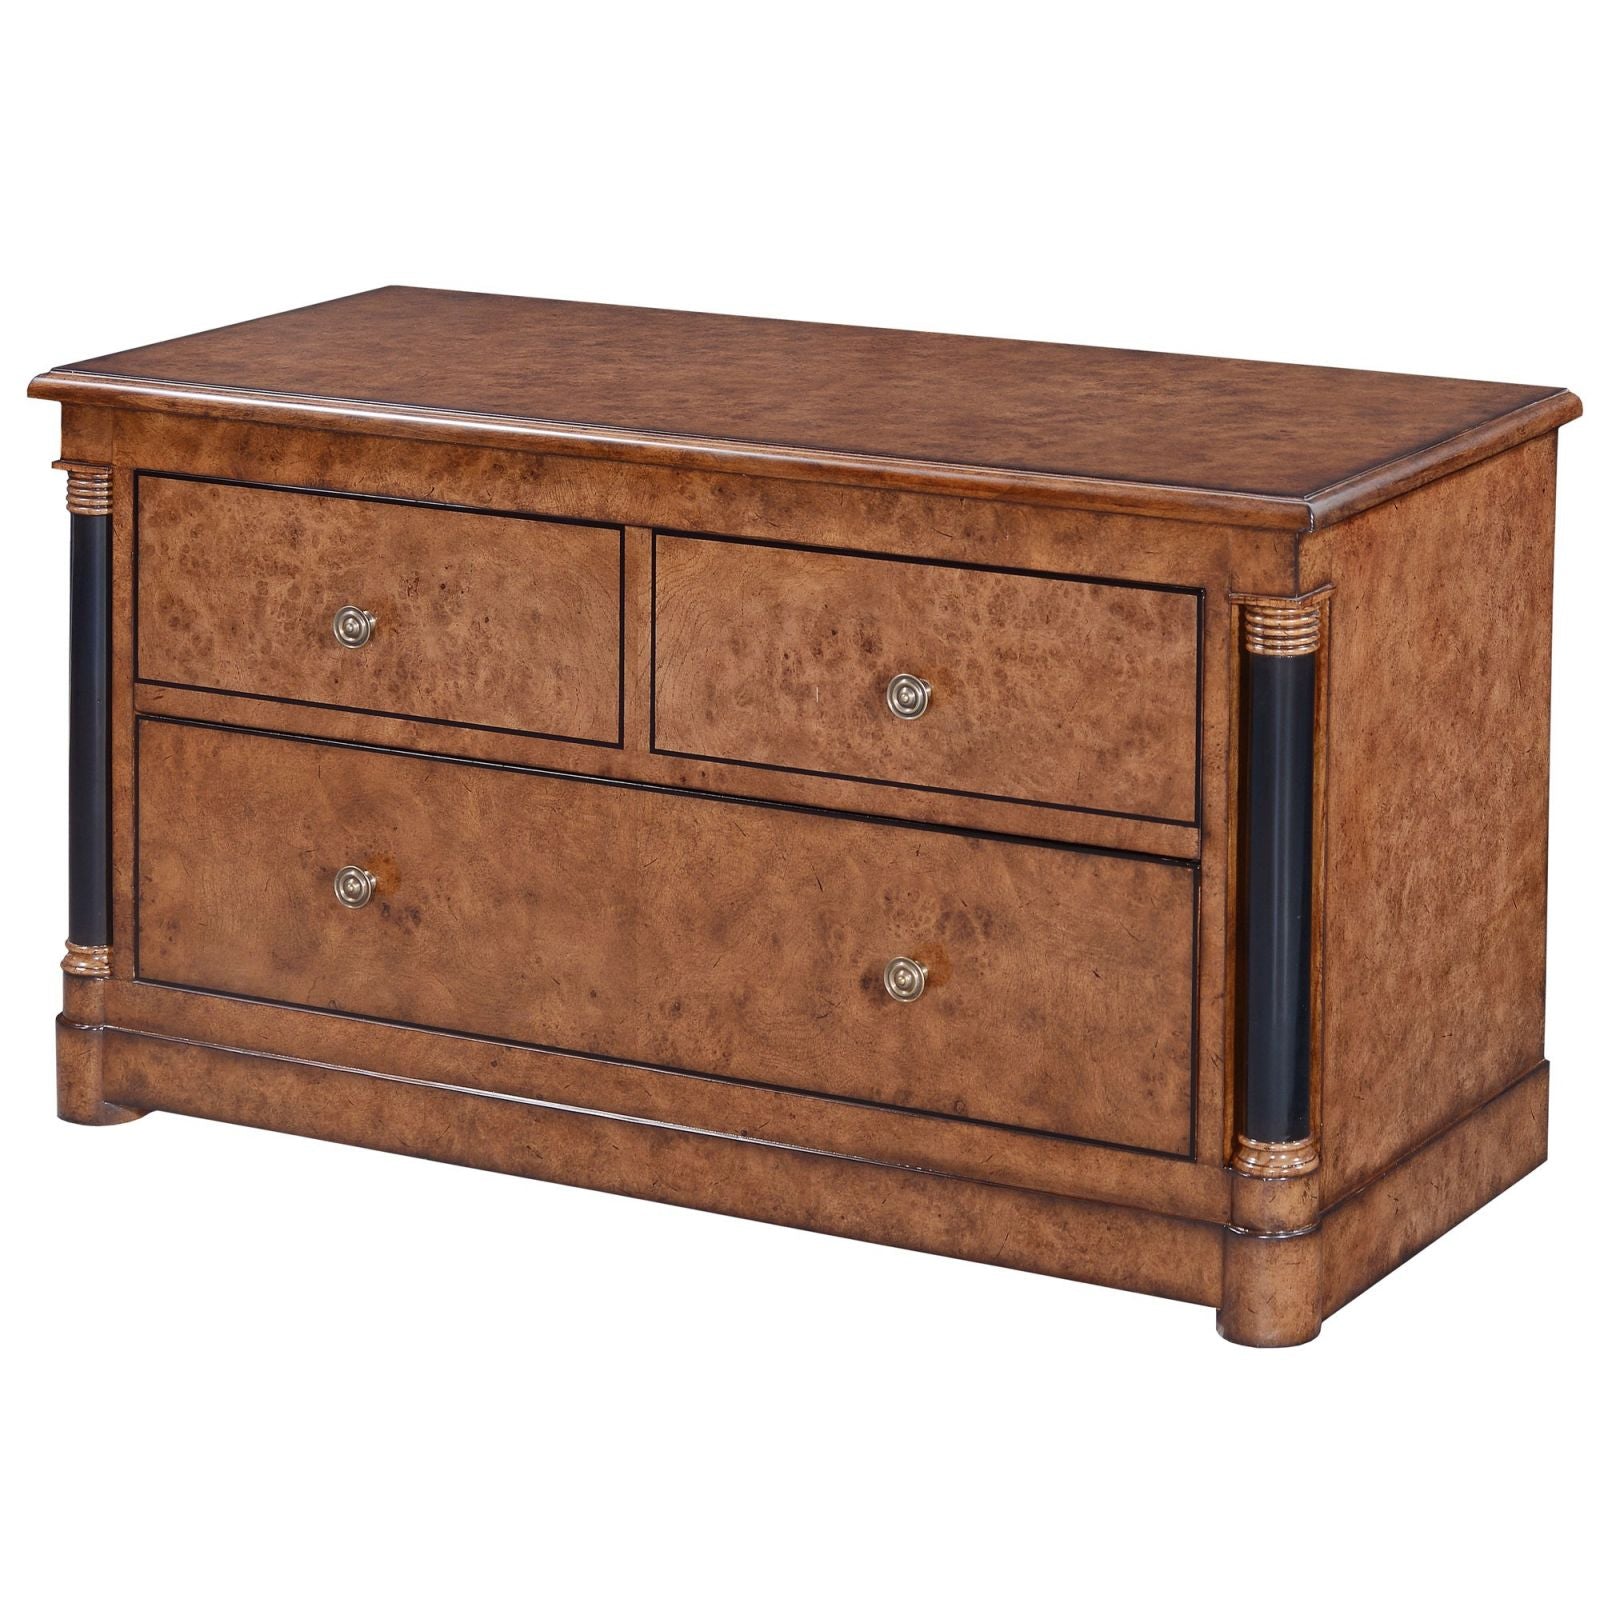 Empire television stand - burr oak with ebony line